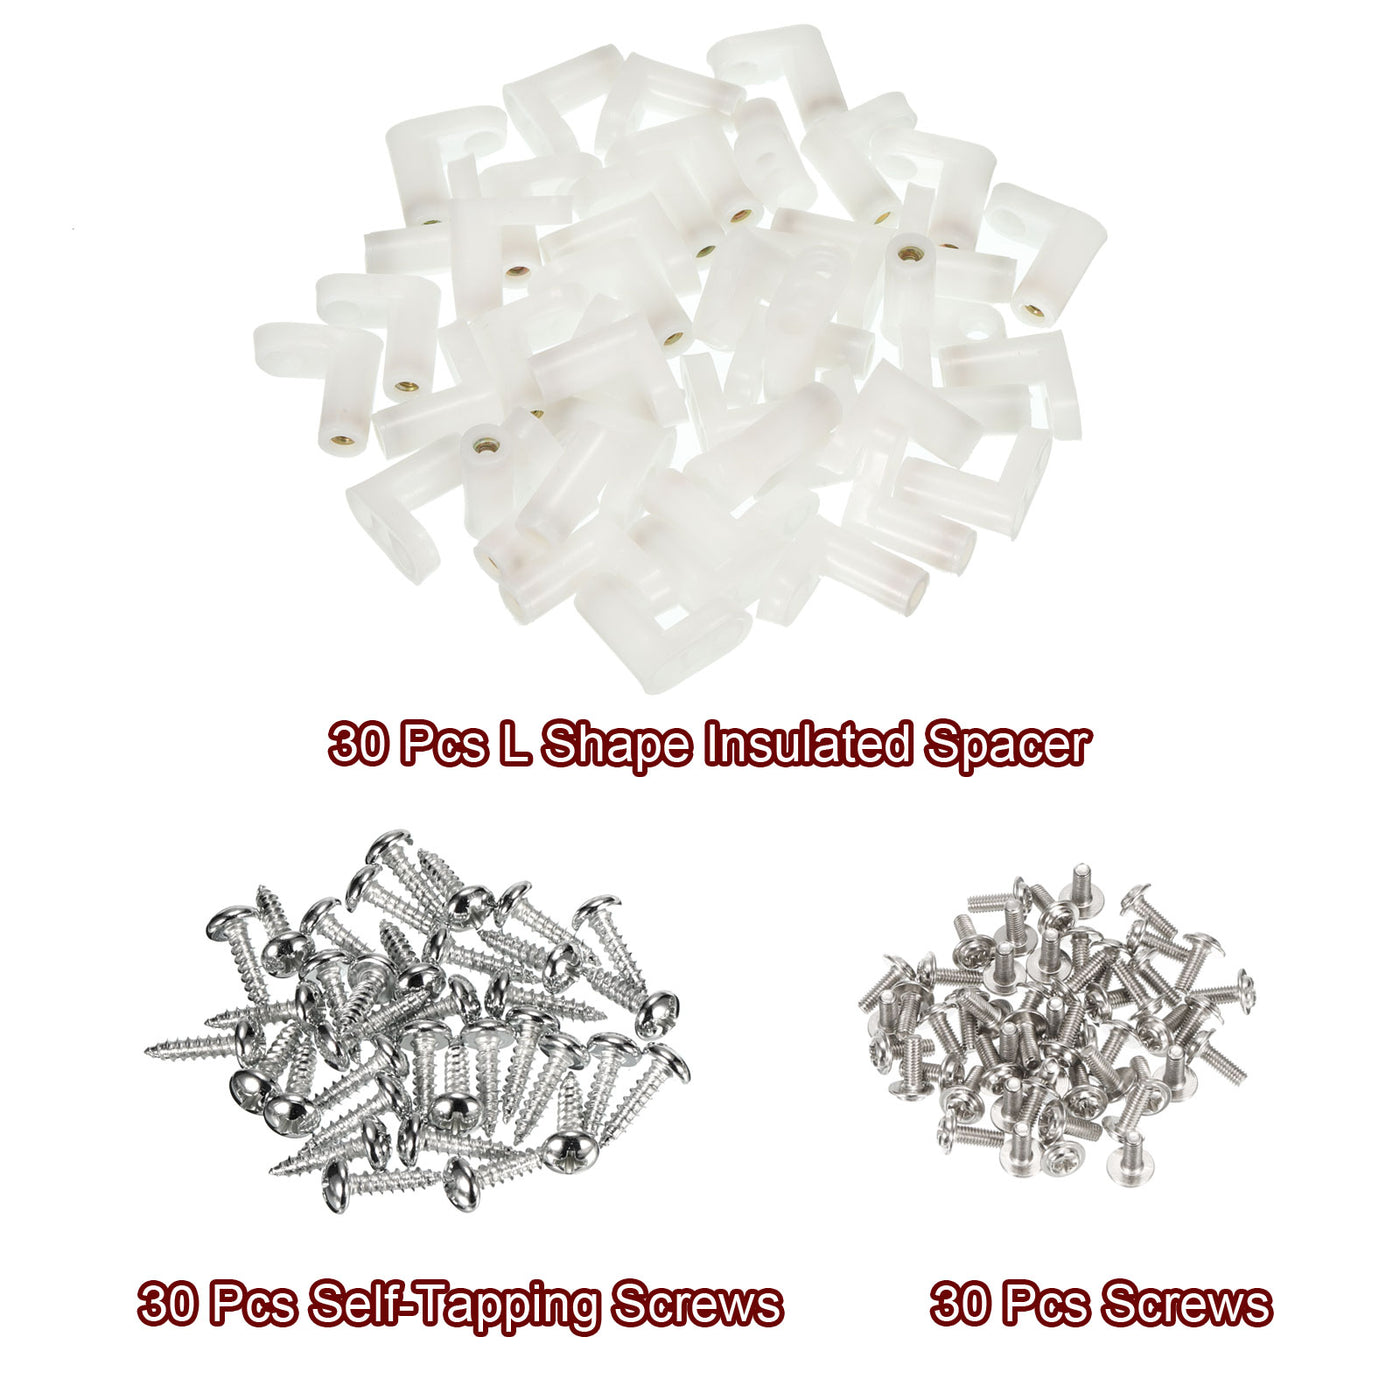 uxcell Uxcell 30 Pcs Circuit Board L Shape Insulated PCB Spacer 20mm Standoffs Mounting Feet Supporting Height with Screws White